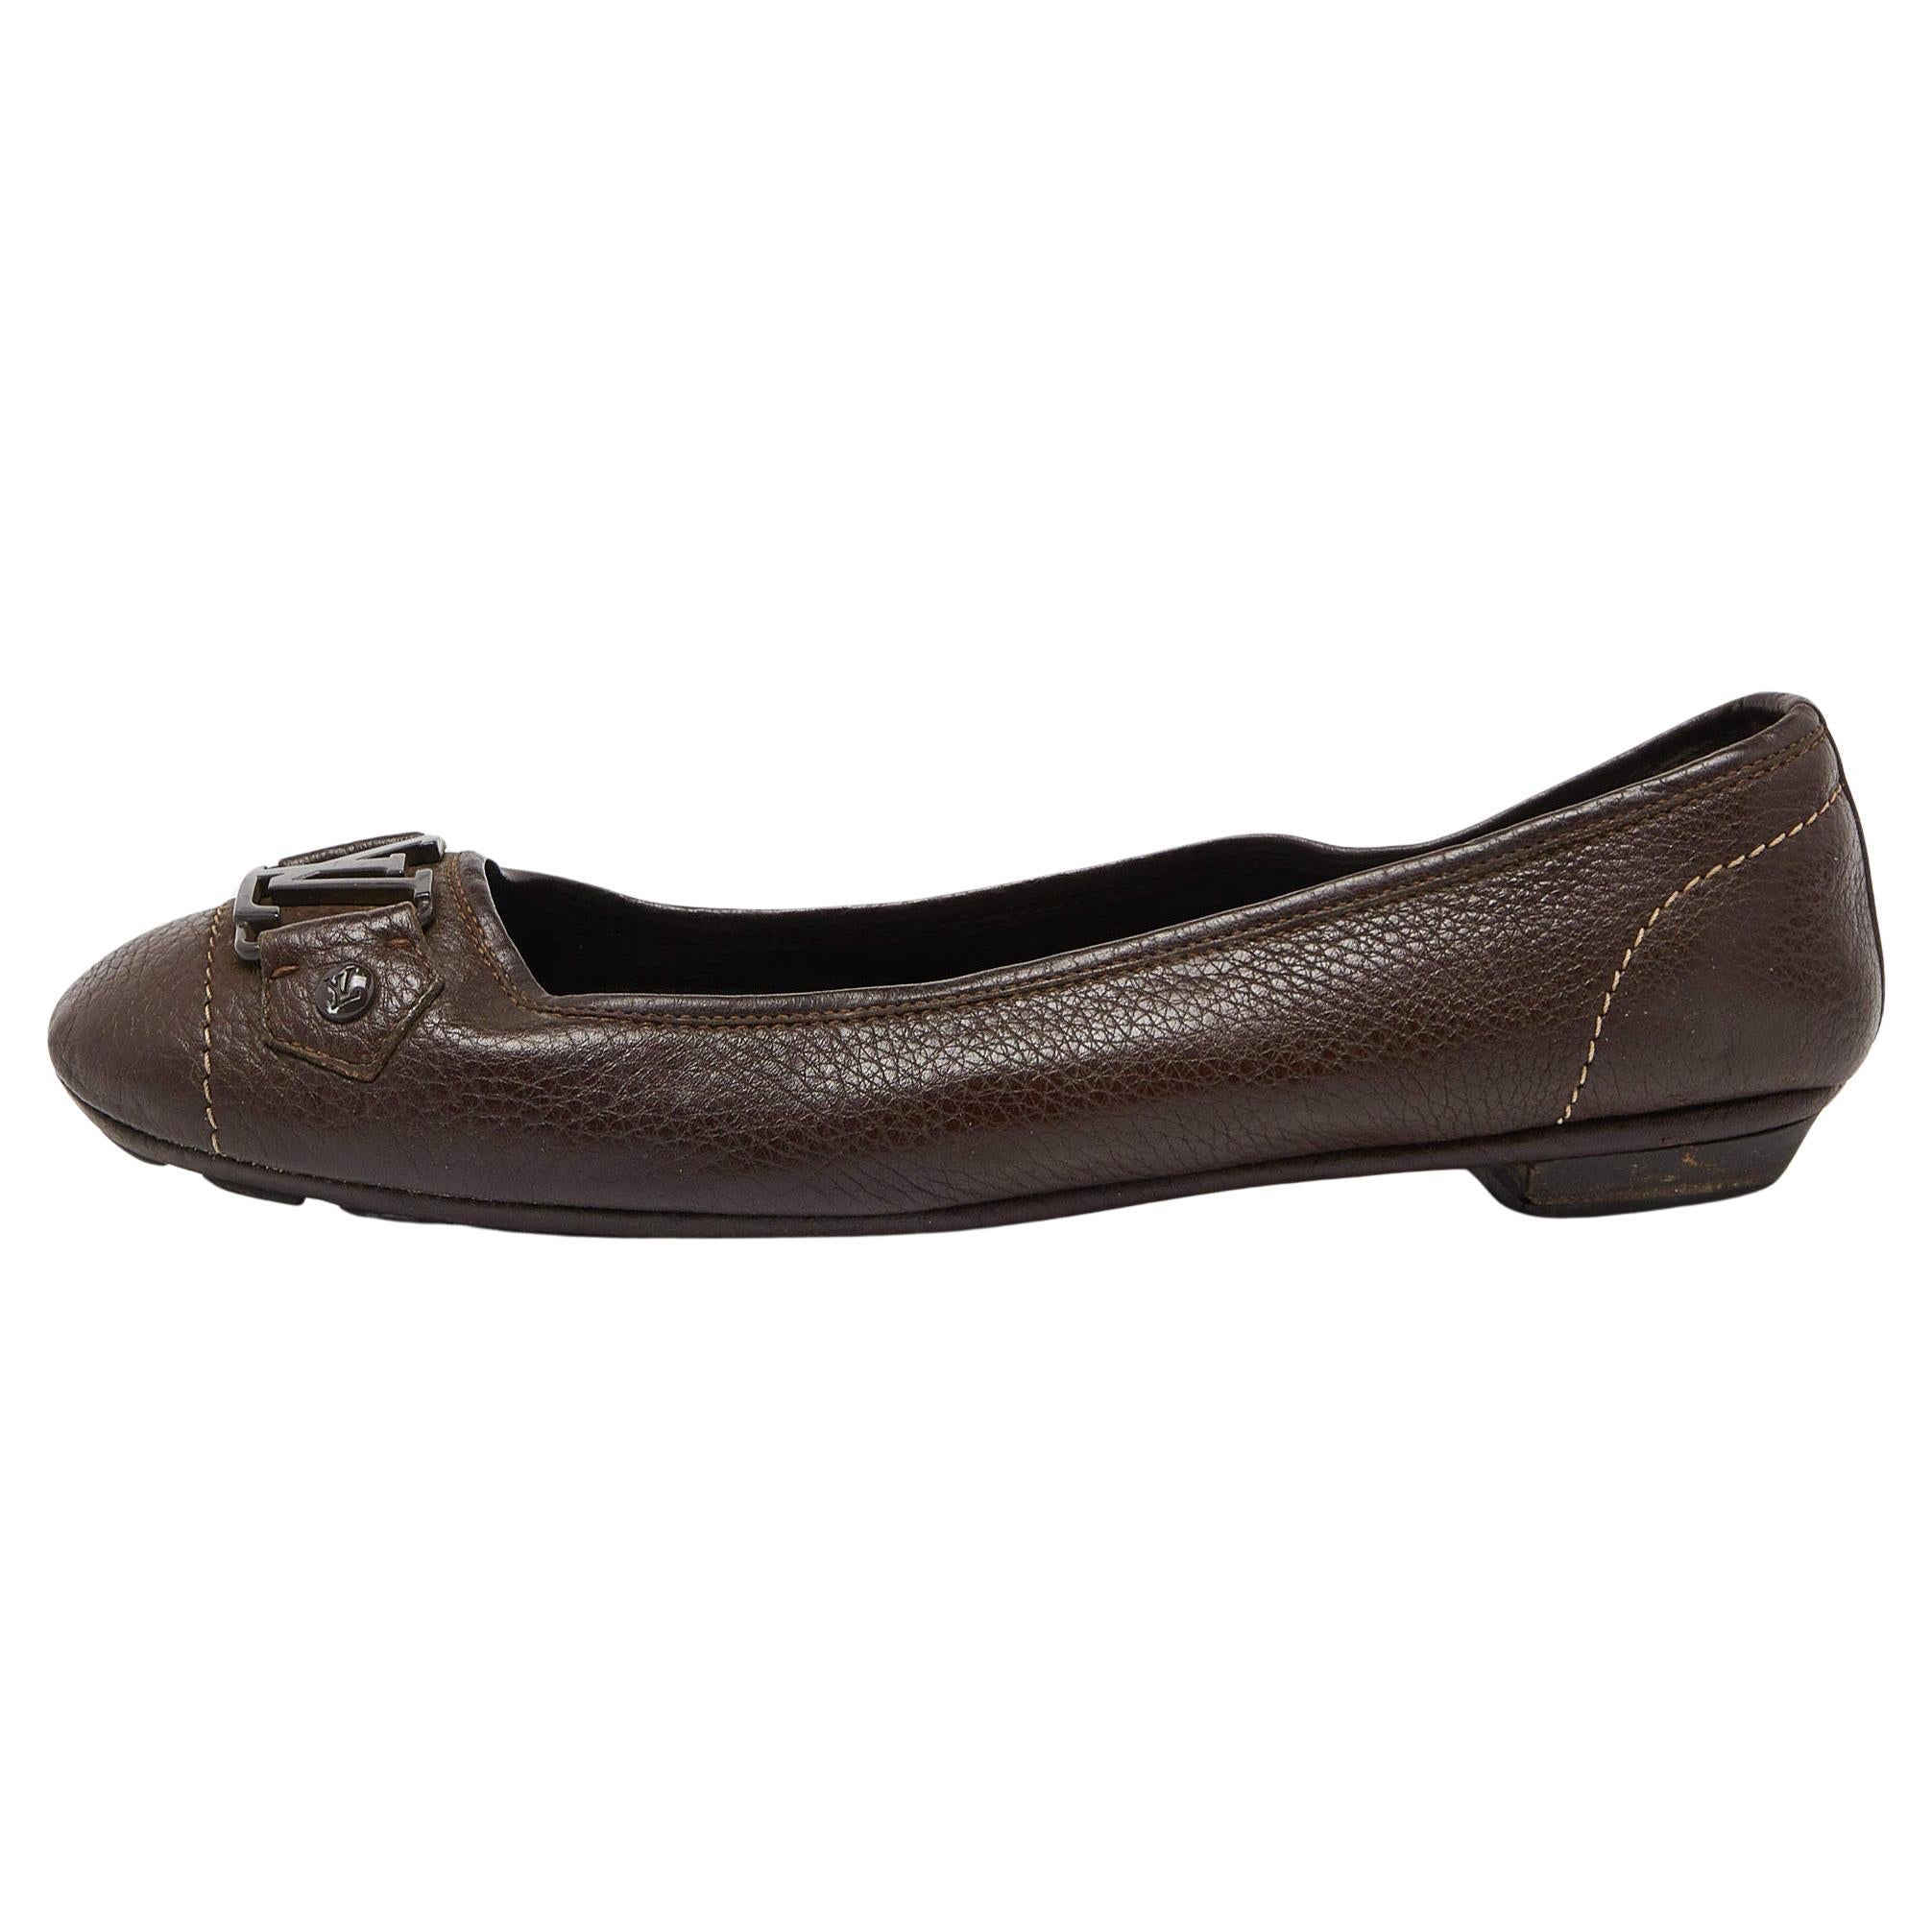 Louis Vuitton Brown Leather Oxford Ballet Flats Size 40 For Sale